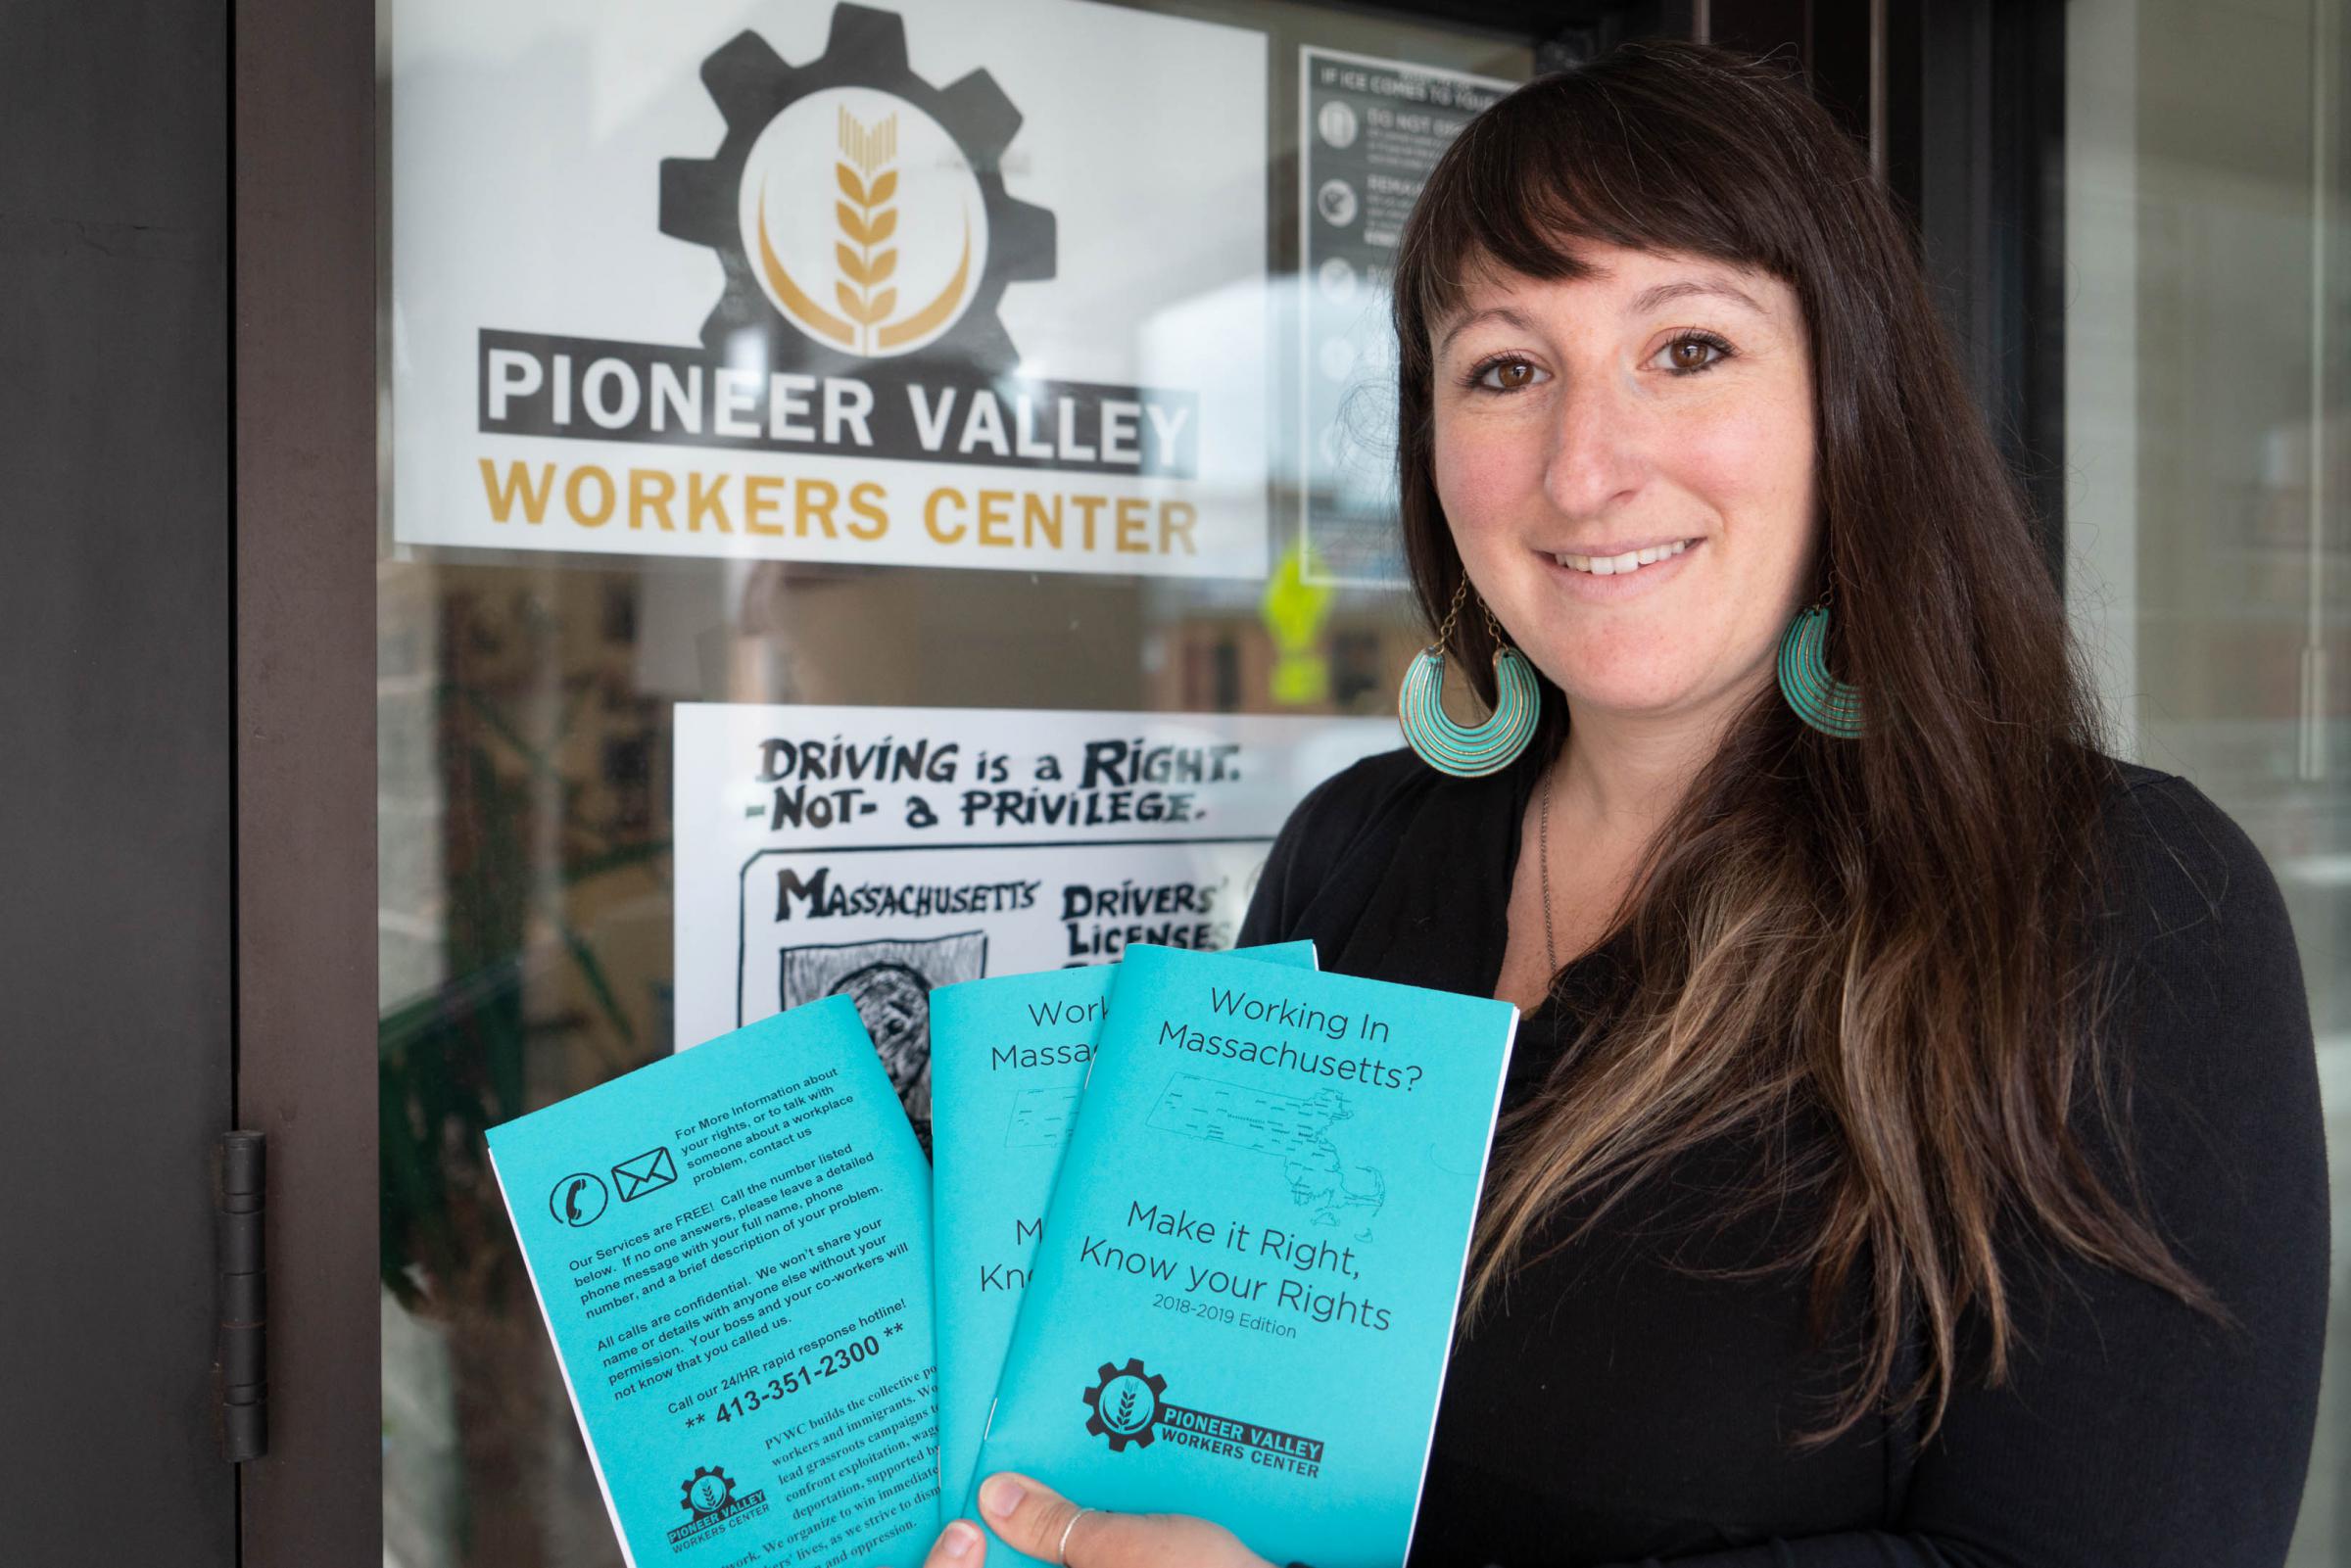 Rose Bookbinder, co-director of the Pioneer Valley Workers Center, holds pamphlets explaining workers rights in Massachusetts. Photo by Ellery Berenger for NEPR